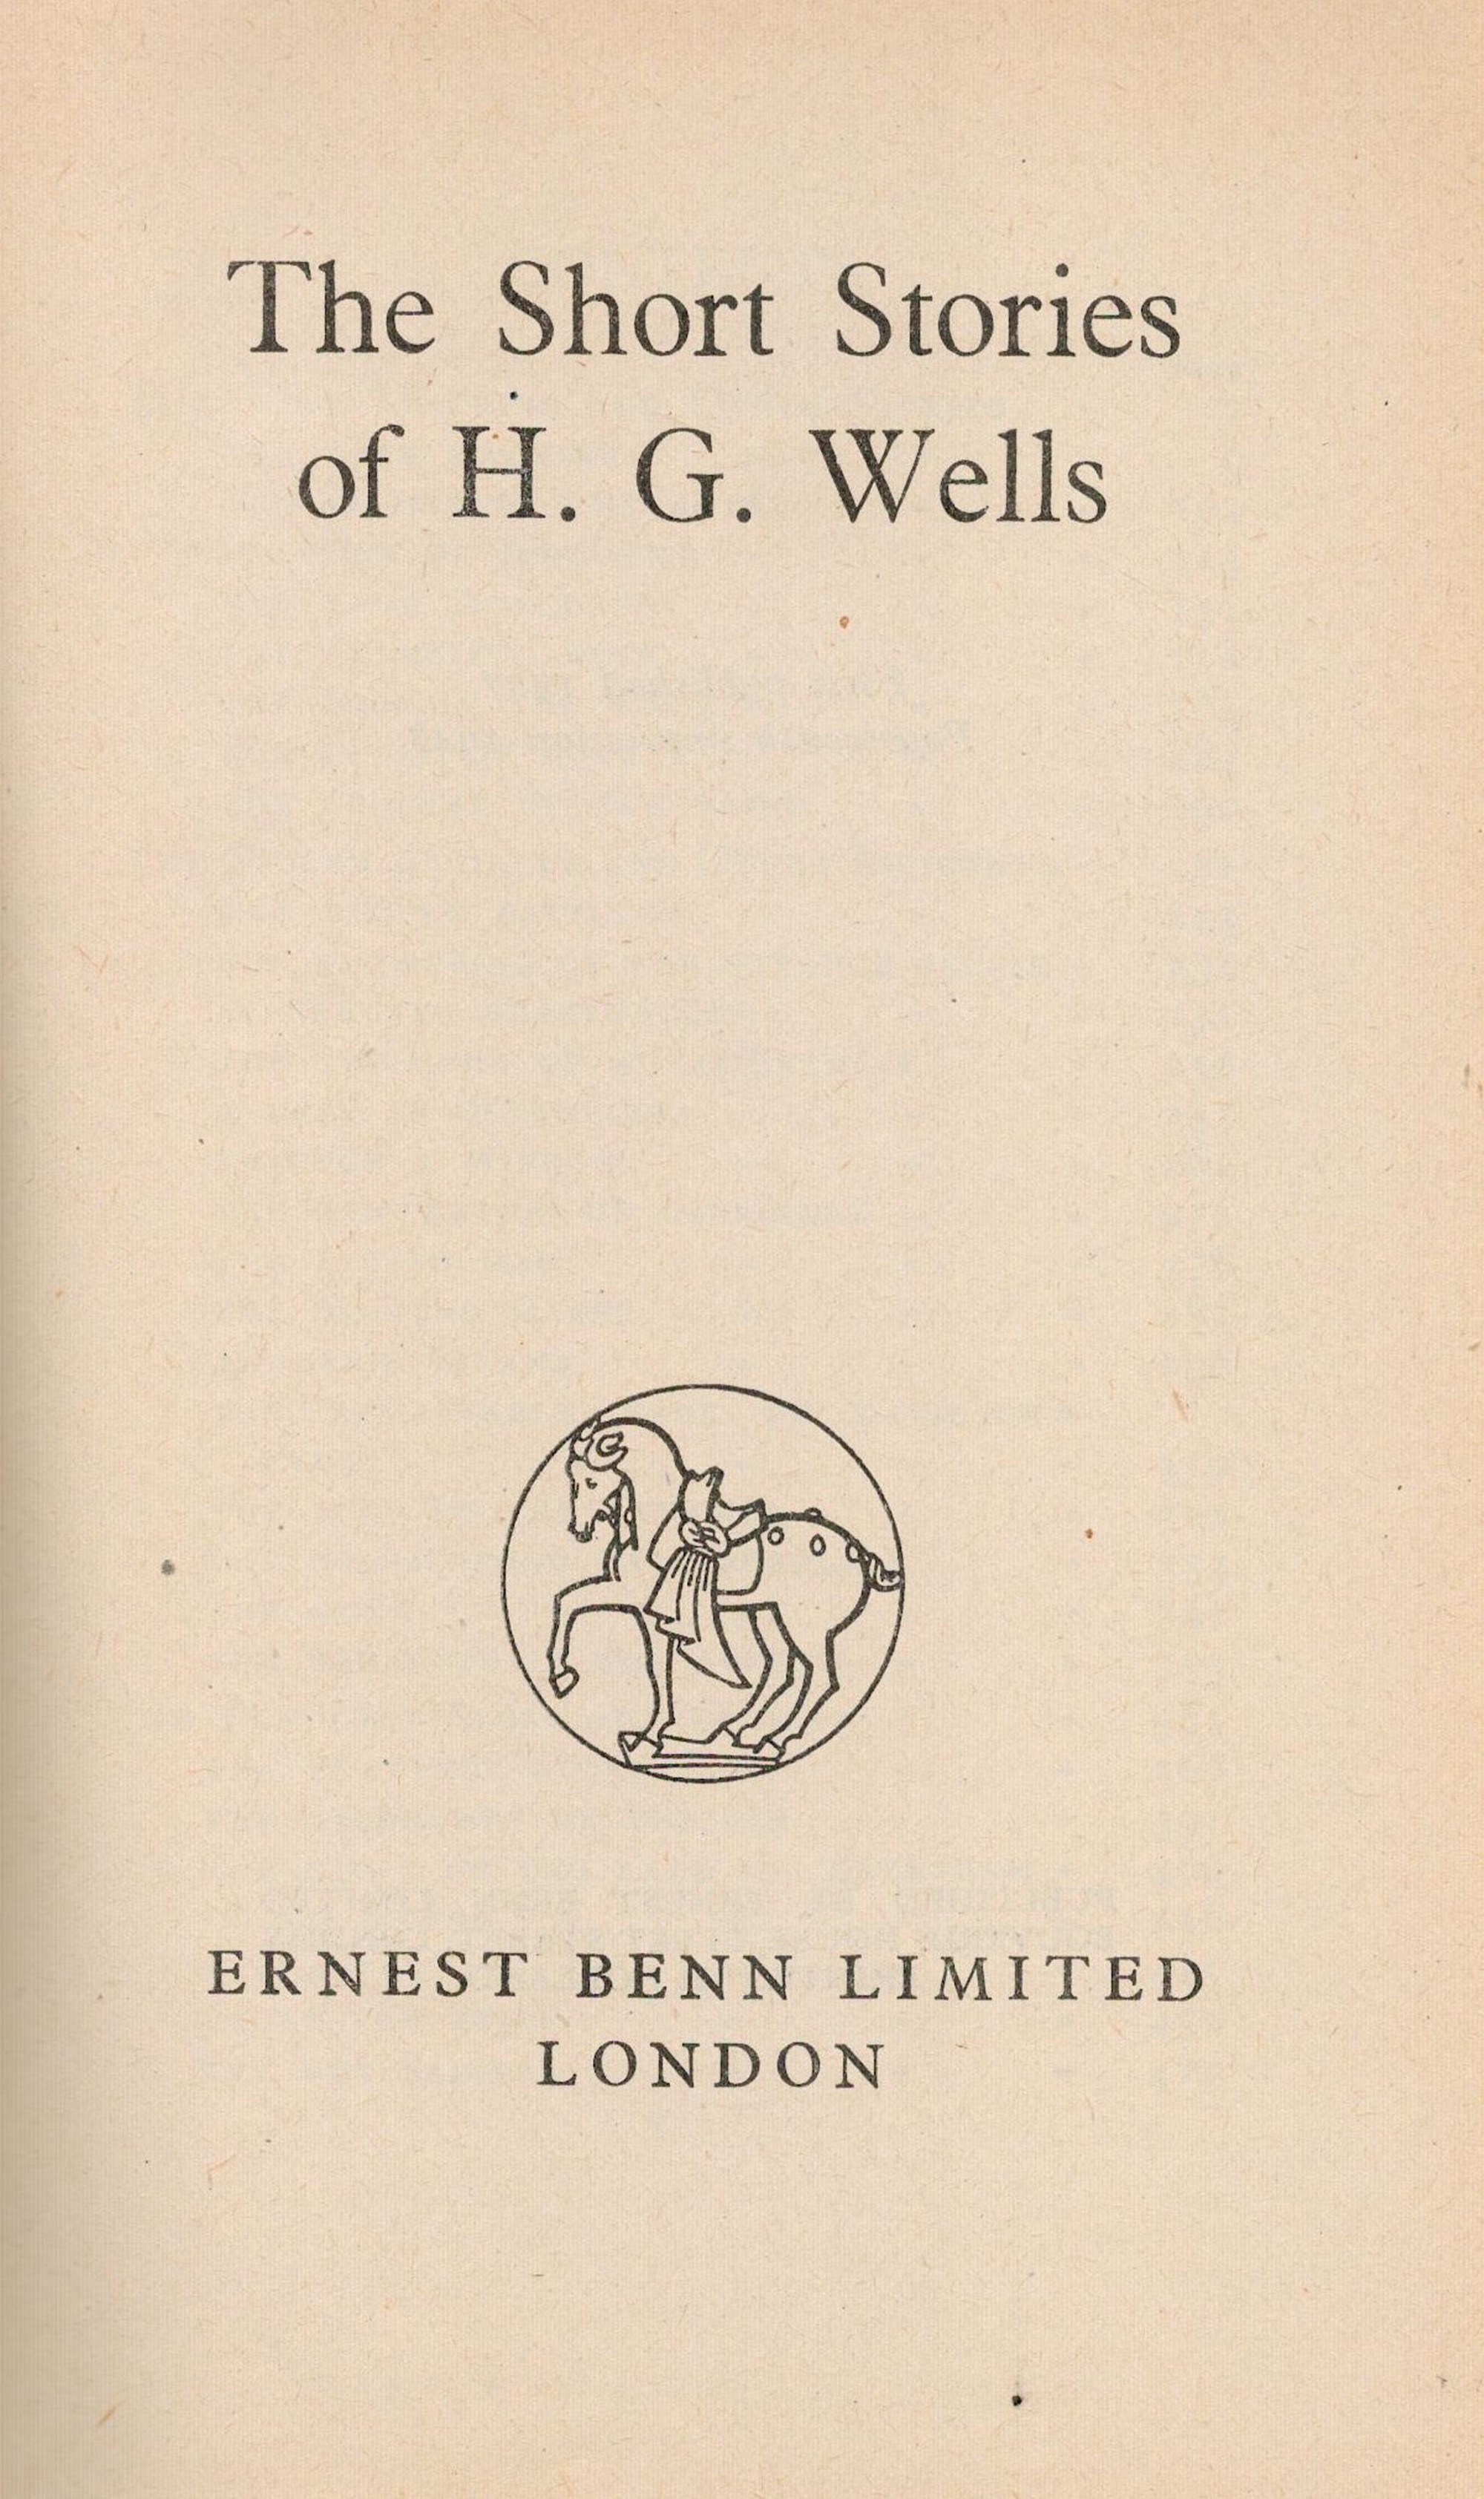 The Short Stories of H G Wells Hardback Book 1948 14th Edition published by Ernest Benn Ltd some - Image 3 of 6